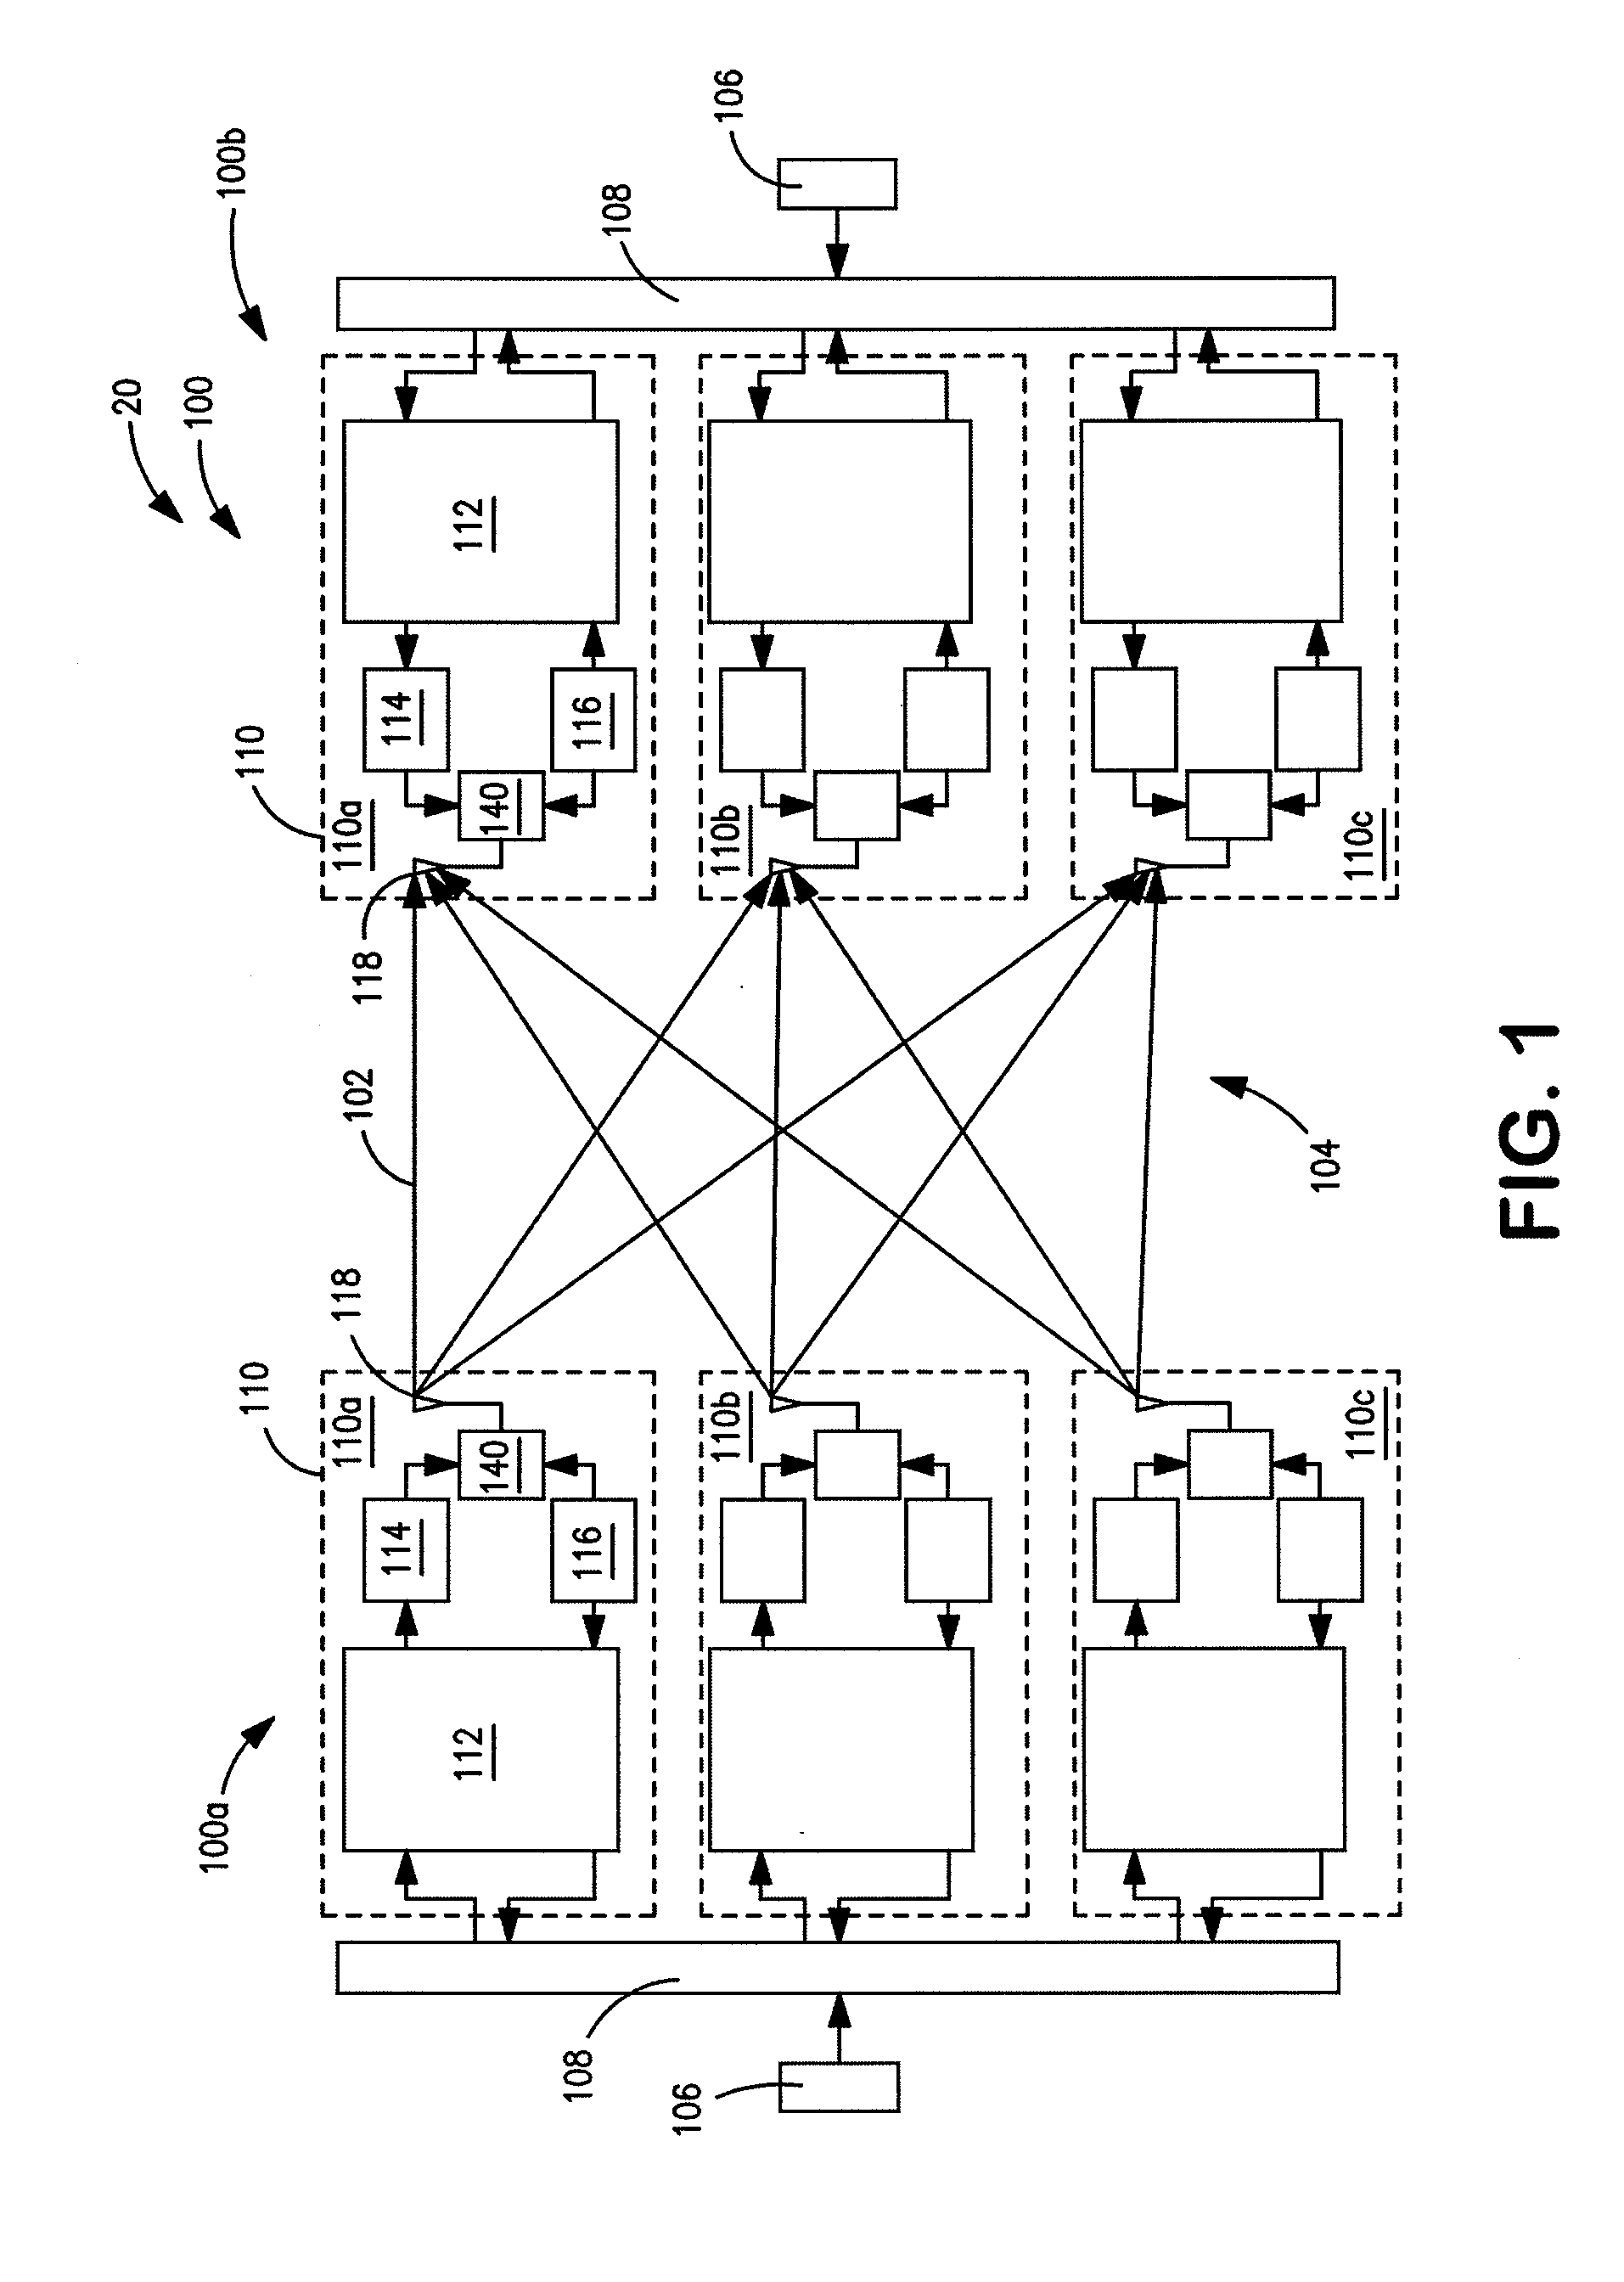 System and method for frequency offsetting of information communicated in mimo-based wireless networks